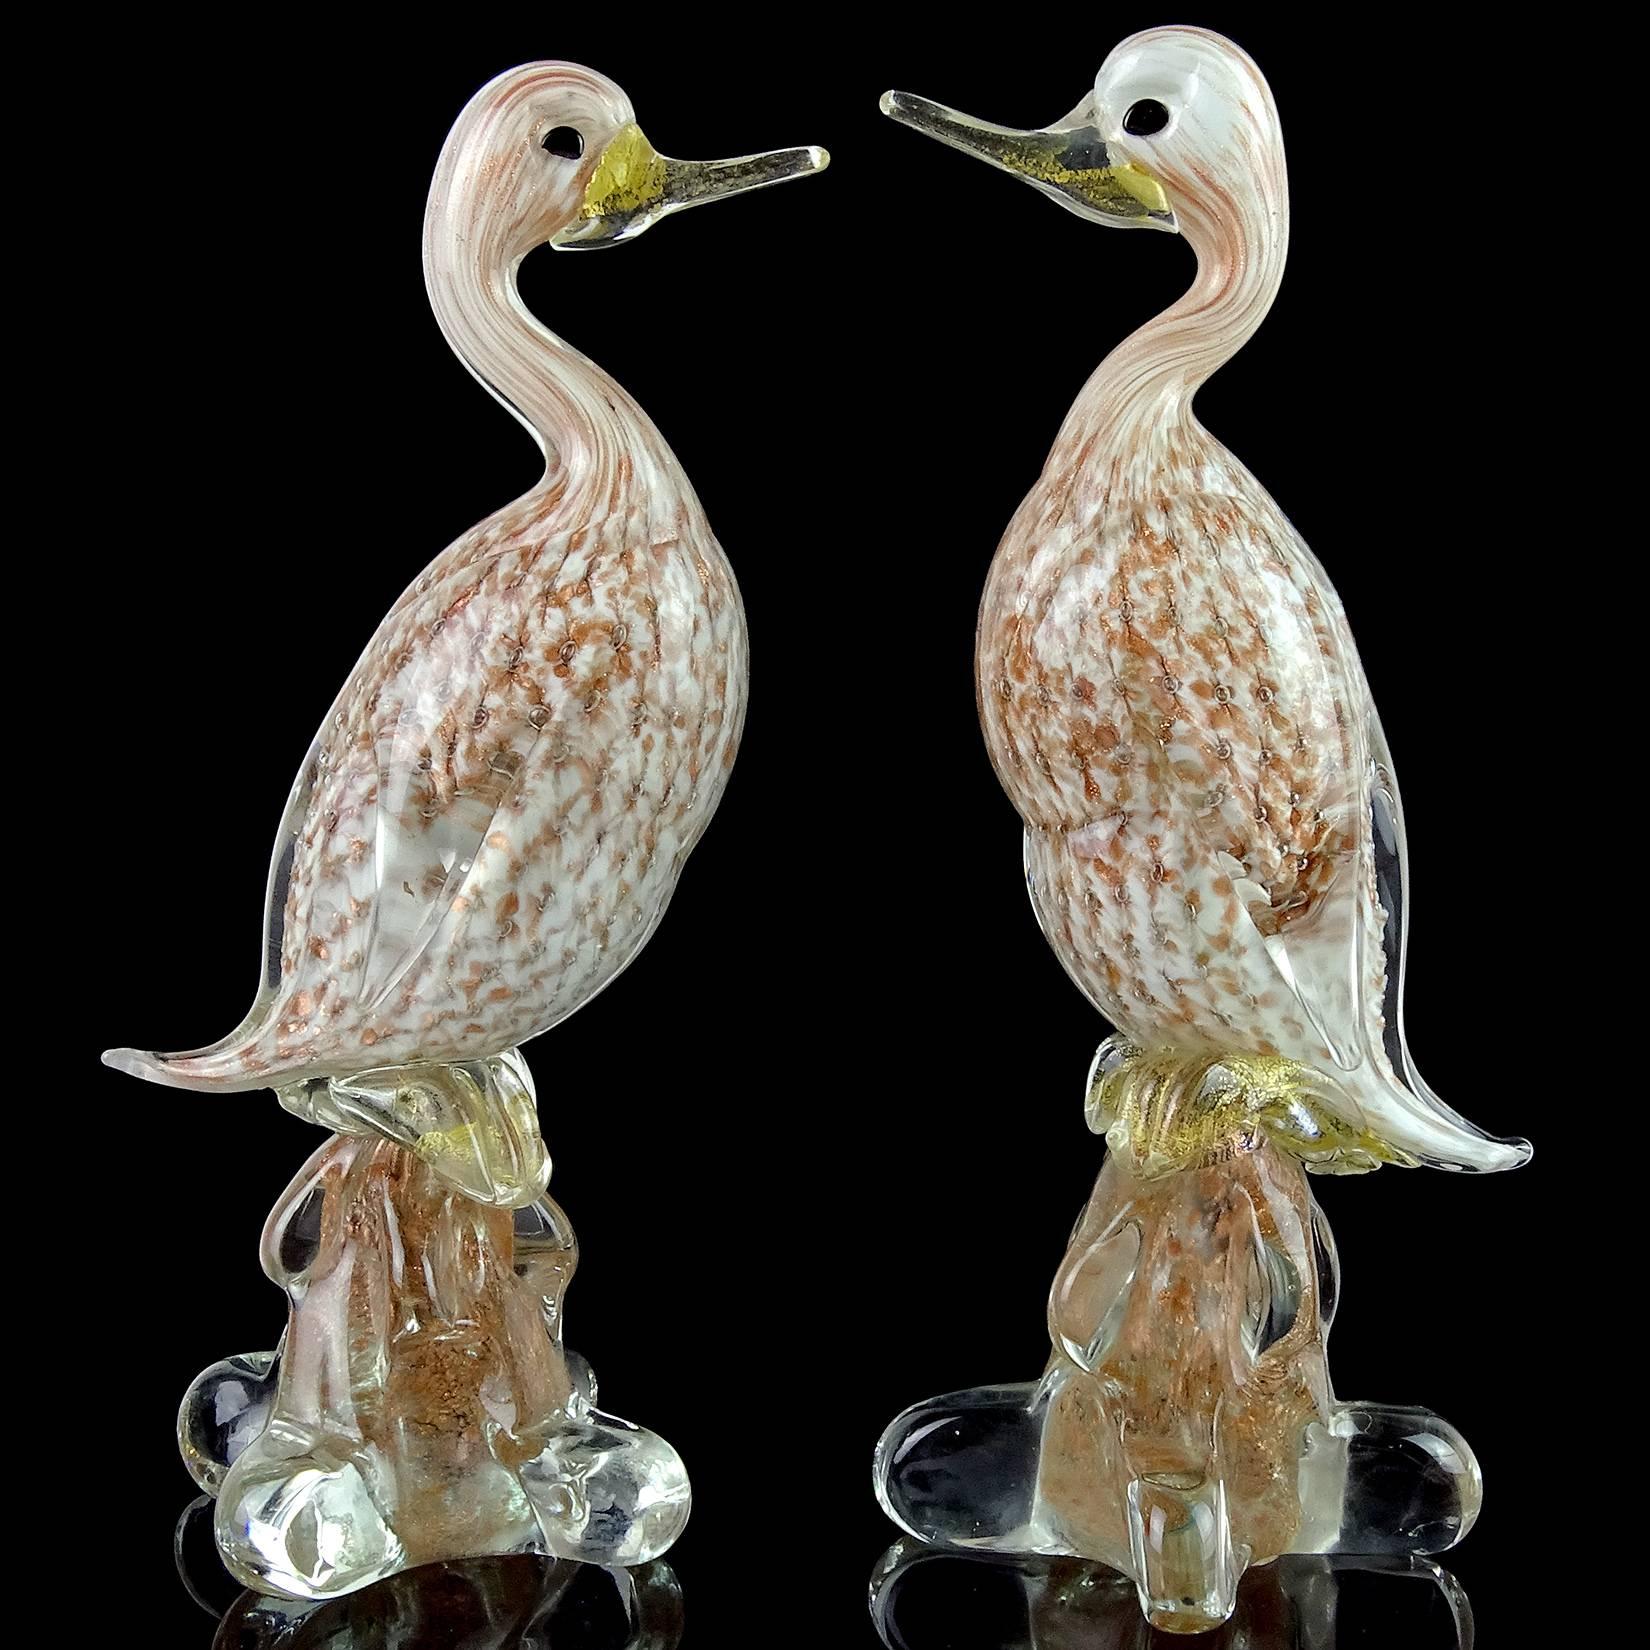 Beautiful pair of vintage Murano hand blown, controlled bubbles, copper aventurine and gold flecks Italian art glass duck sculptures. Attributed to the Fratelli Toso Company. The bubbles in the birds create a starburst design of the aventurine.